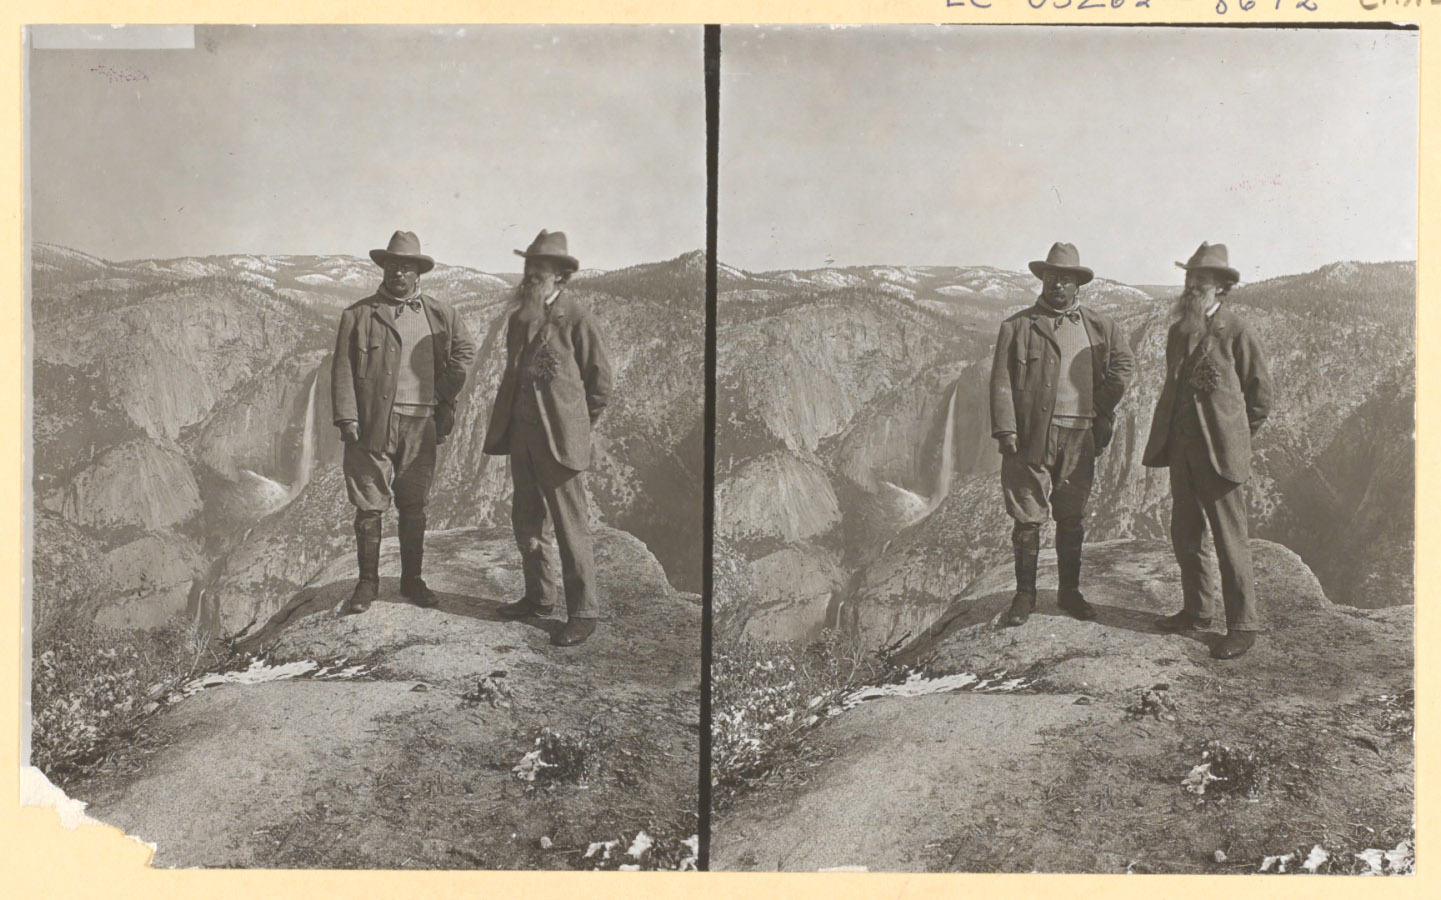 PHOTO: Theodore Roosevelt and John Muir on Glacier Point, Yosemite Valley, California, in 1903.